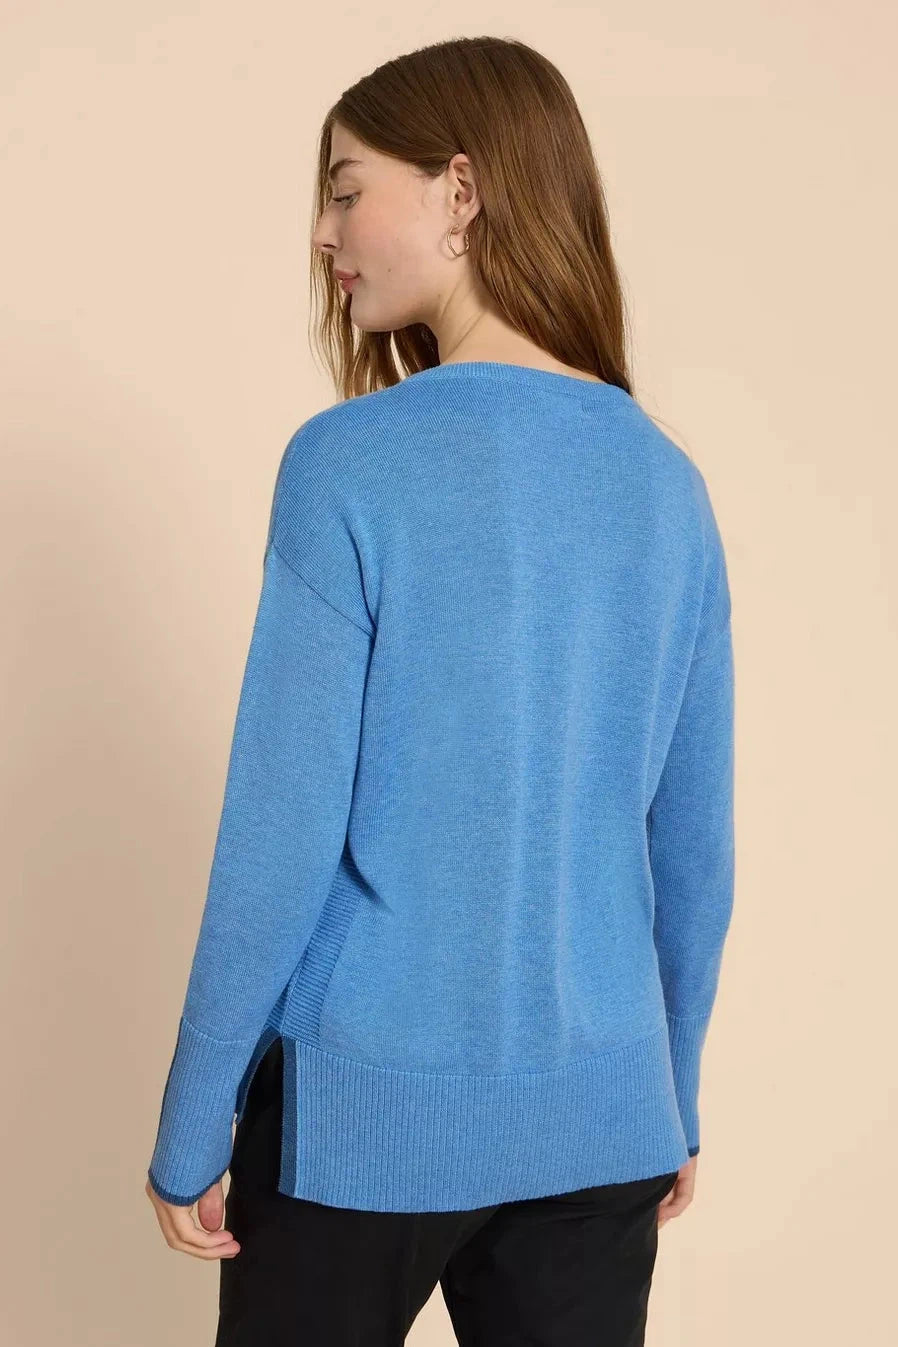 White Stuff Olive Jumper in Chambray Blue-Womens-Ohh! By Gum - Shop Sustainable